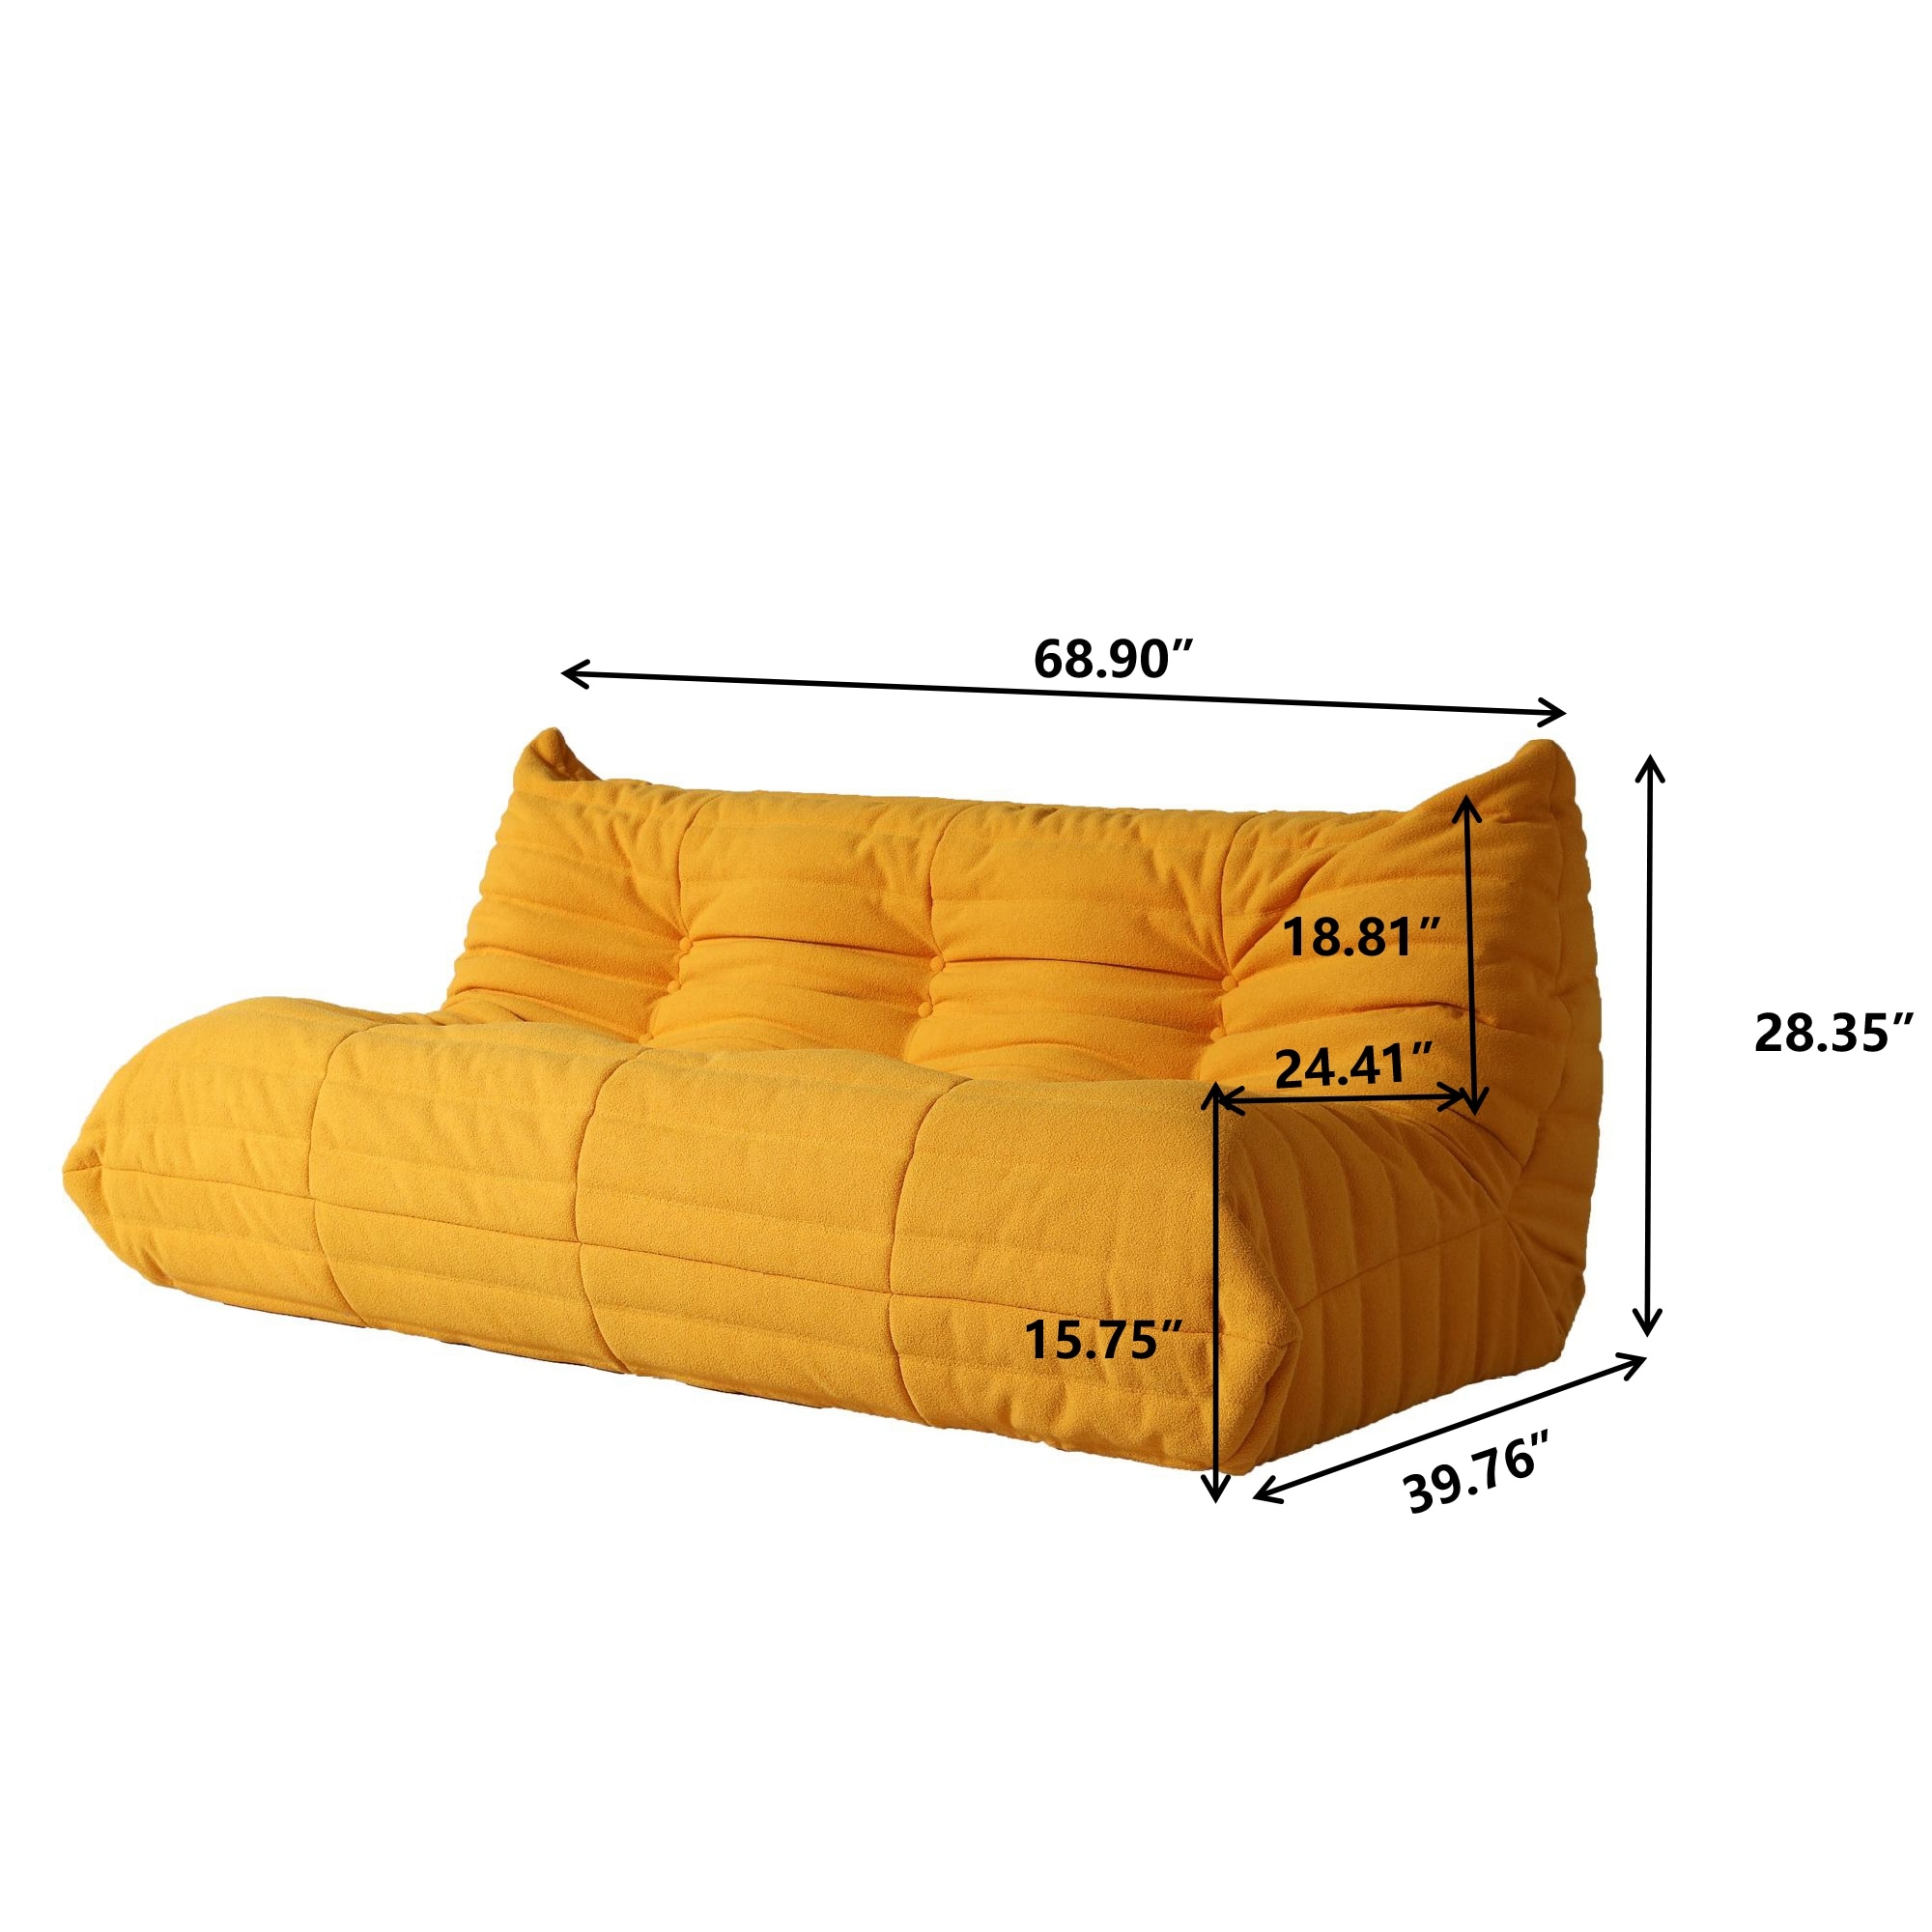 https://ak1.ostkcdn.com/images/products/is/images/direct/22ef2654f043d37990b5950311d6b1599cb86ae1/Teddy-Velvet-Floor-Couch%2CComfortable-Back-Support-Lazy-Sofa-with-Ottoman.jpg